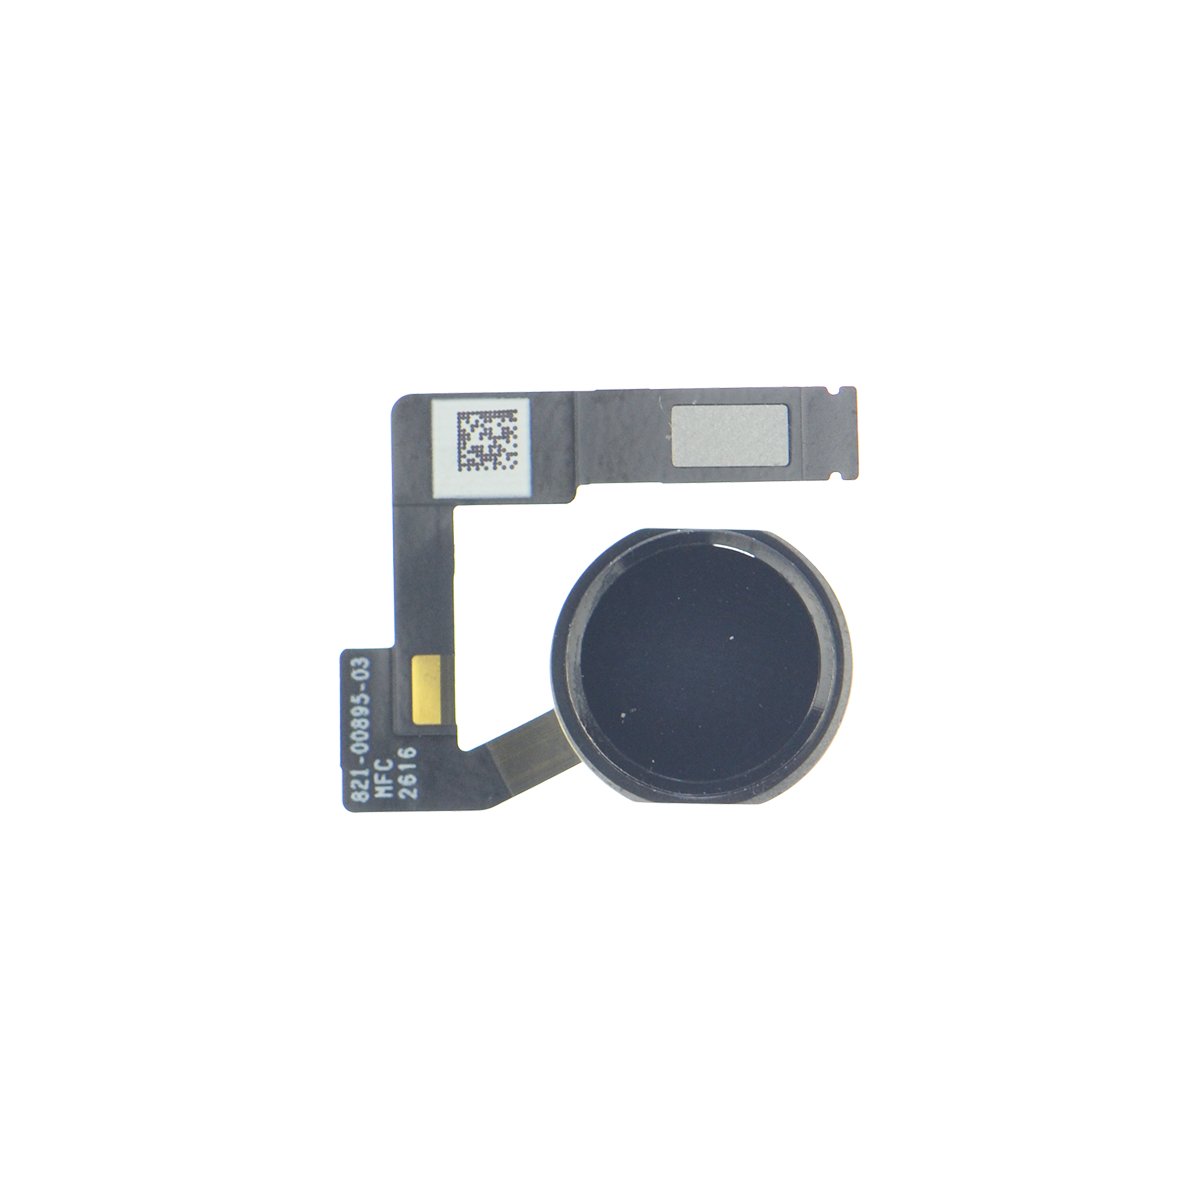 ipad-pro-10-5-home-button-touch-id-assembly-black_S4VPDKKC78LF.png